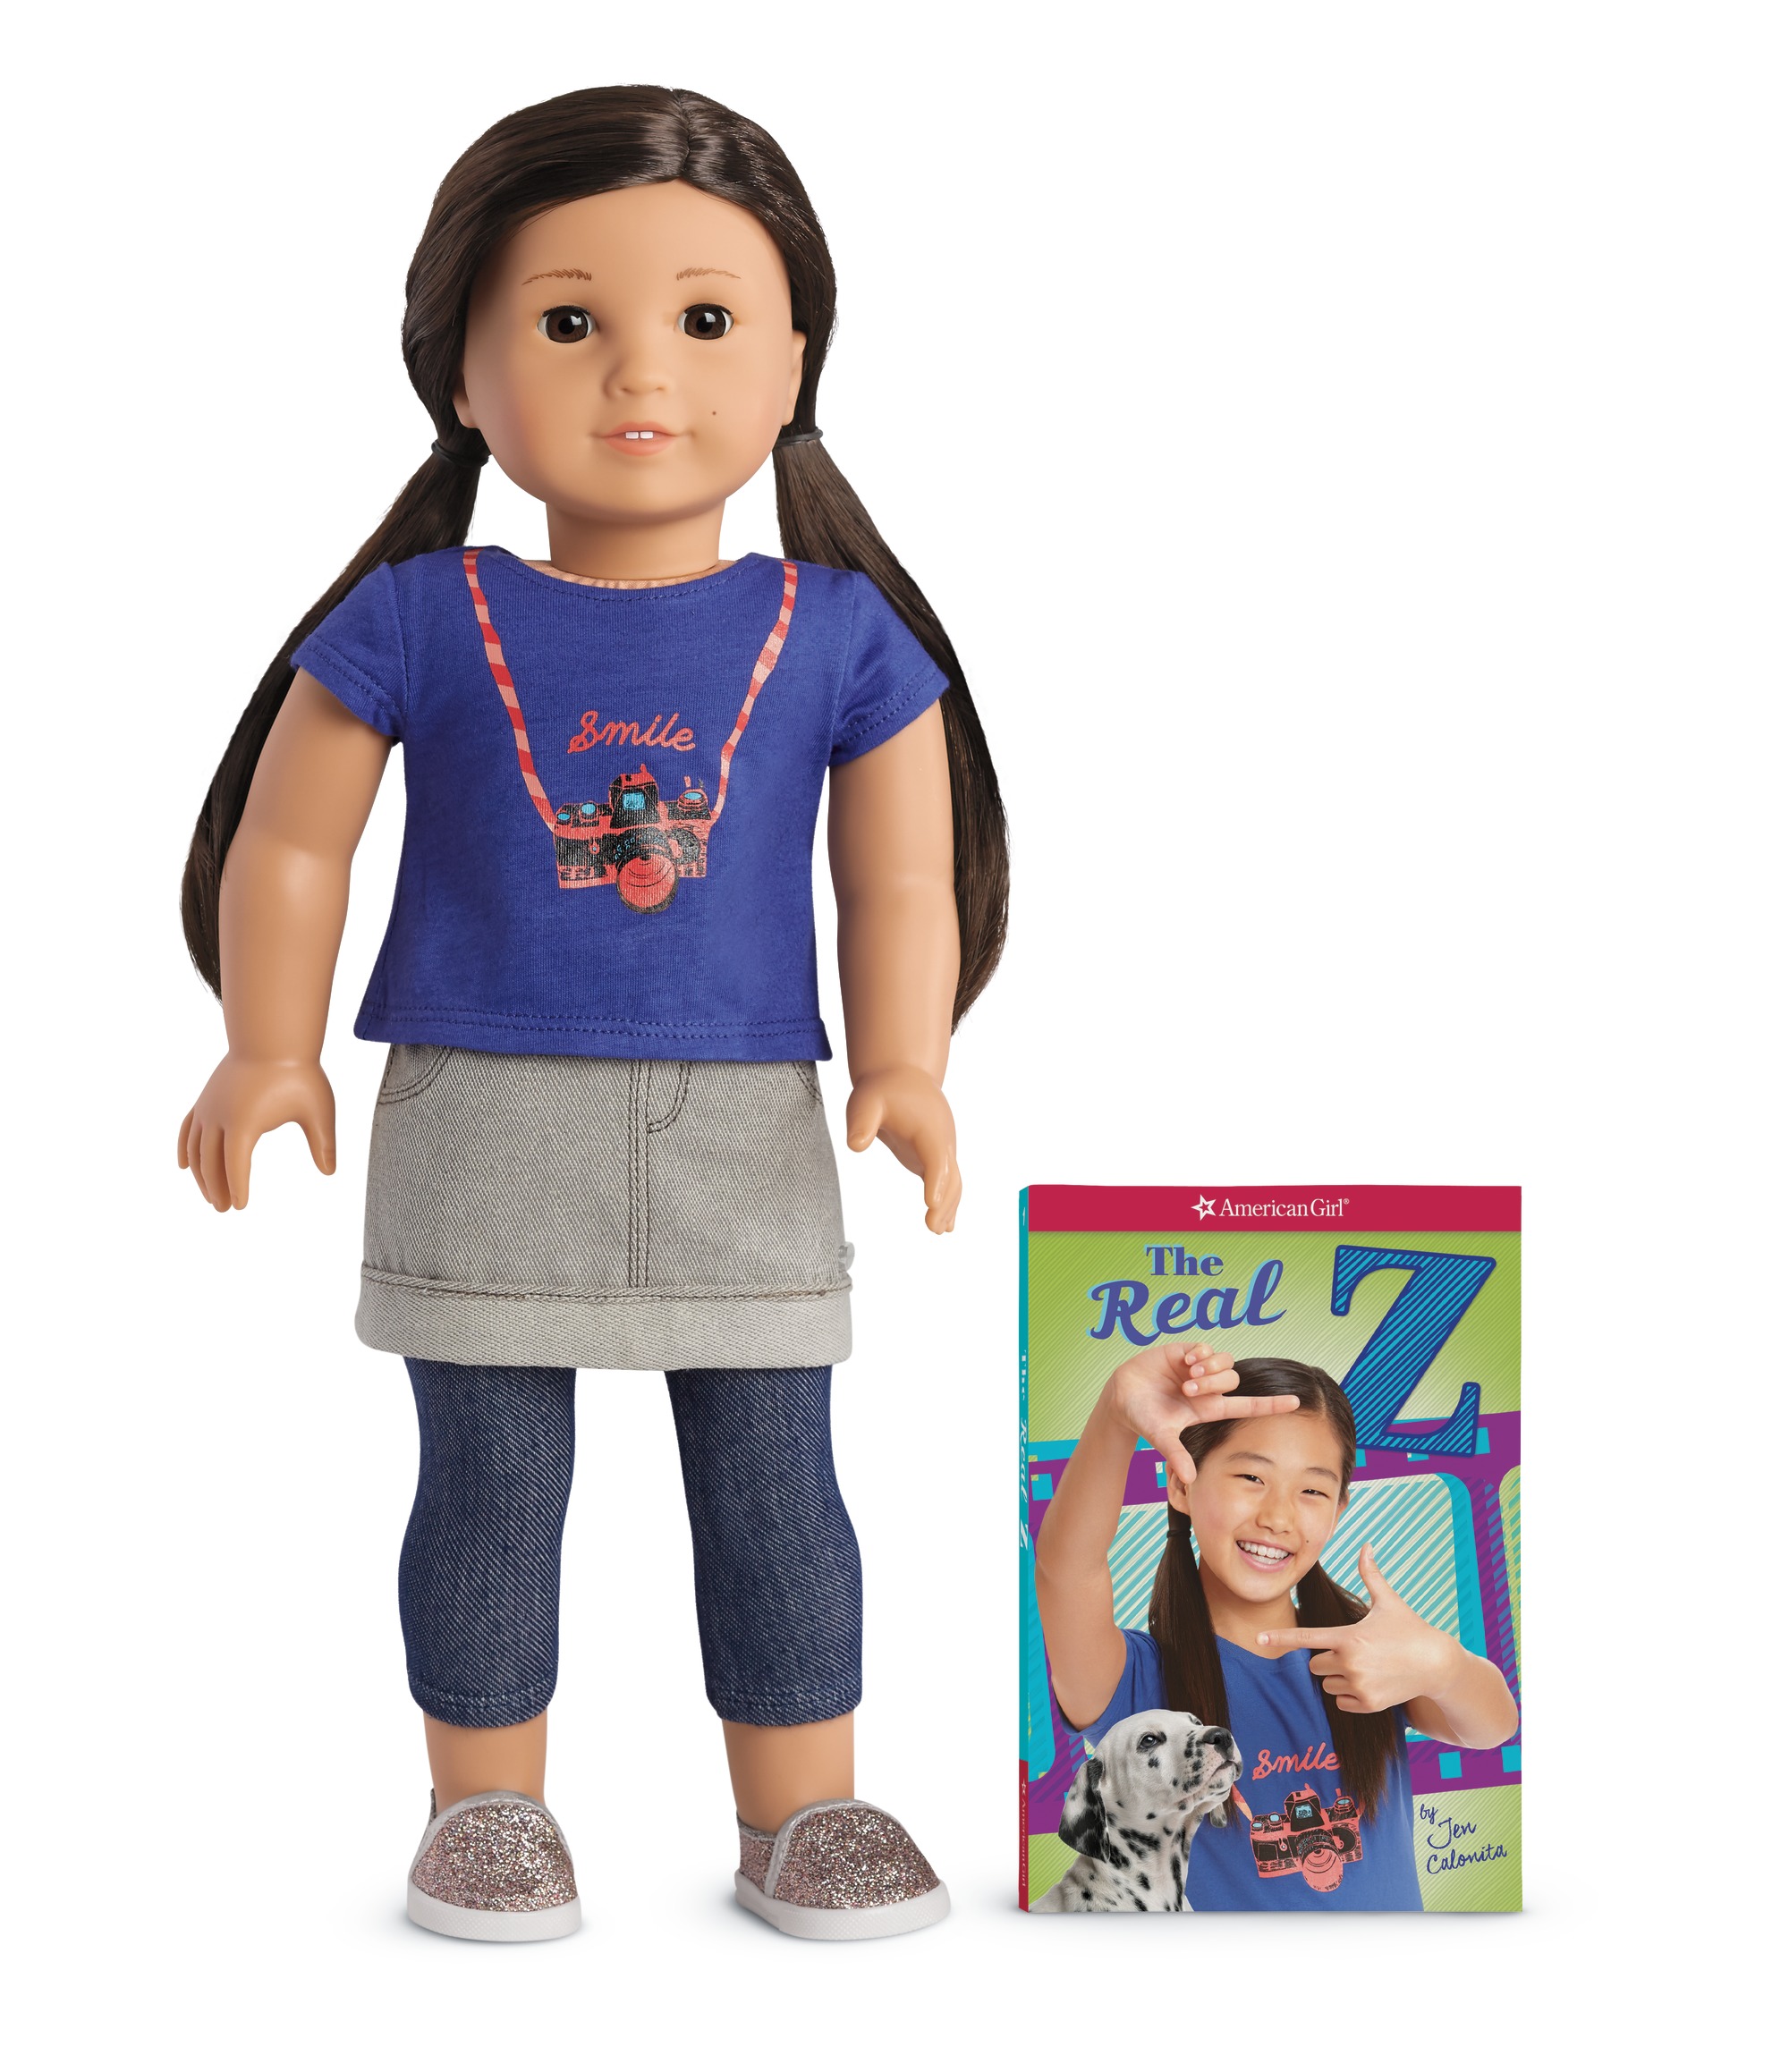 american girl tenney accessories